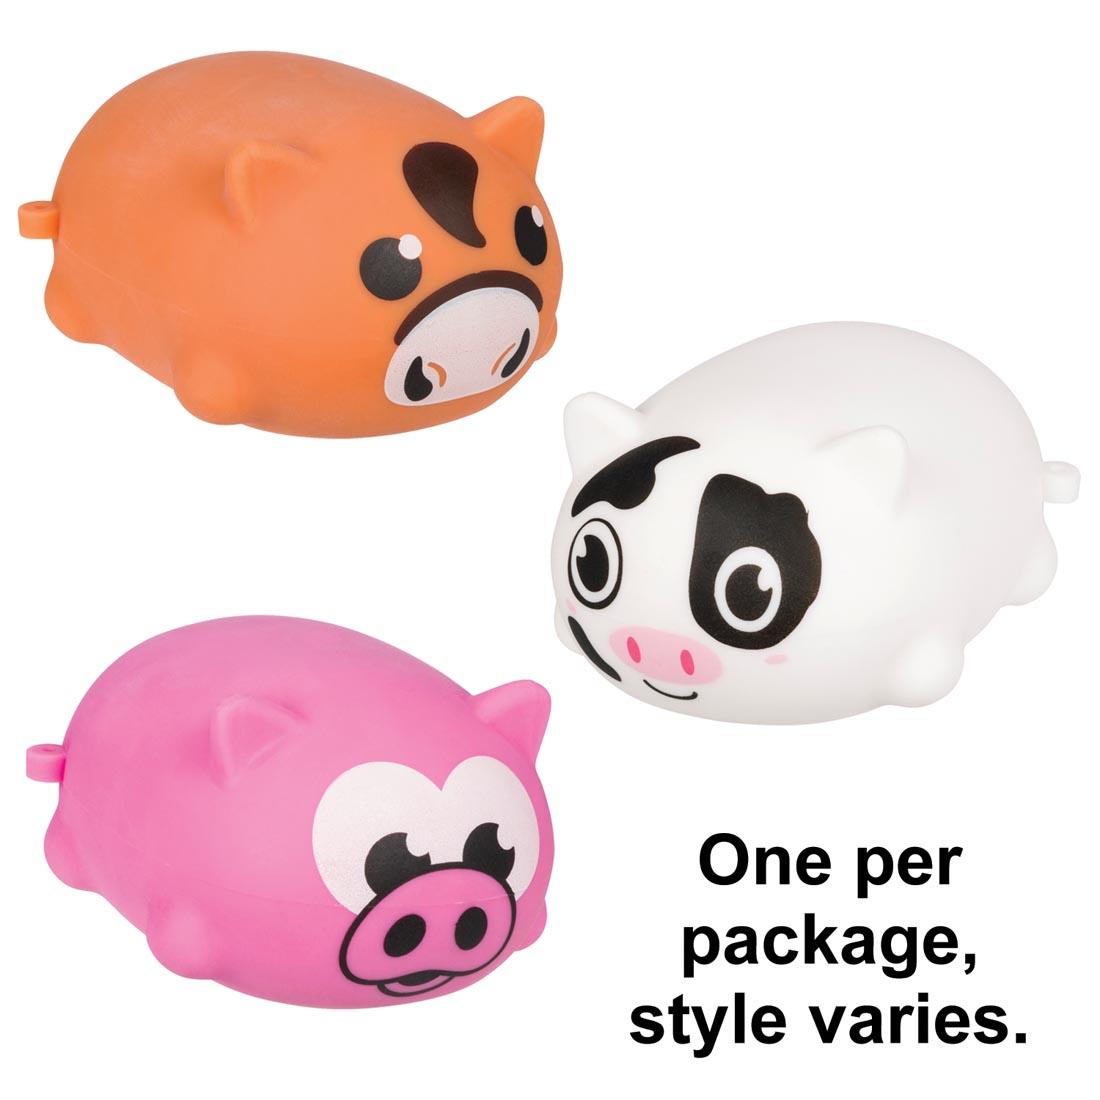 Three different Chubby Barnyard Animal Squeeze Toys with the text One per package, style varies.